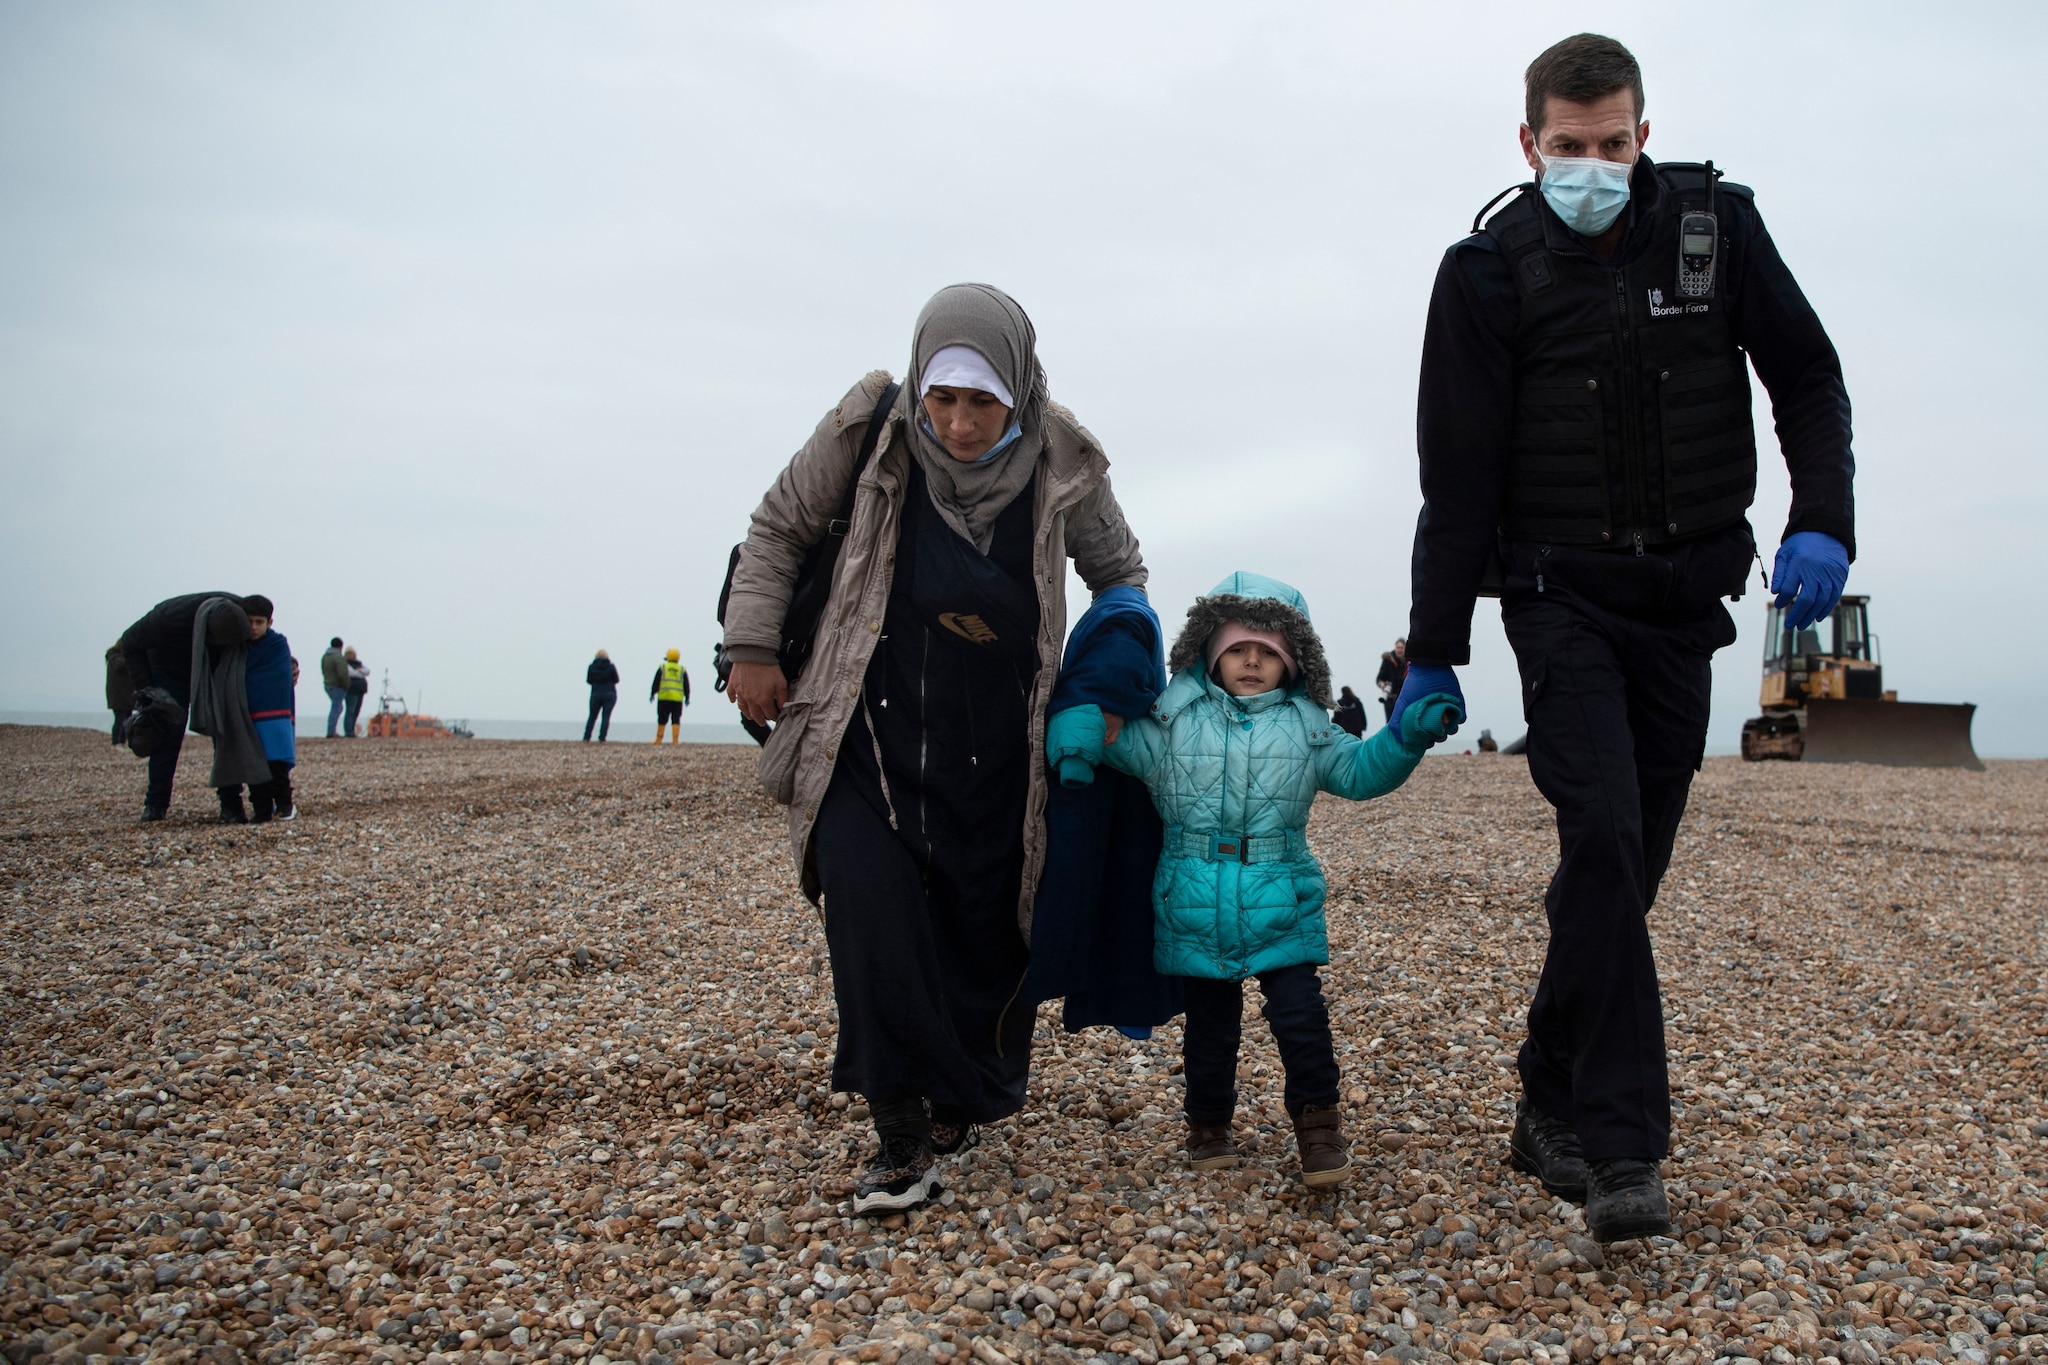 A member of the UK Border Force helps migrants on a beach in Dungeness on 24 November, 2021, after they were rescued while crossing the English Channel. 